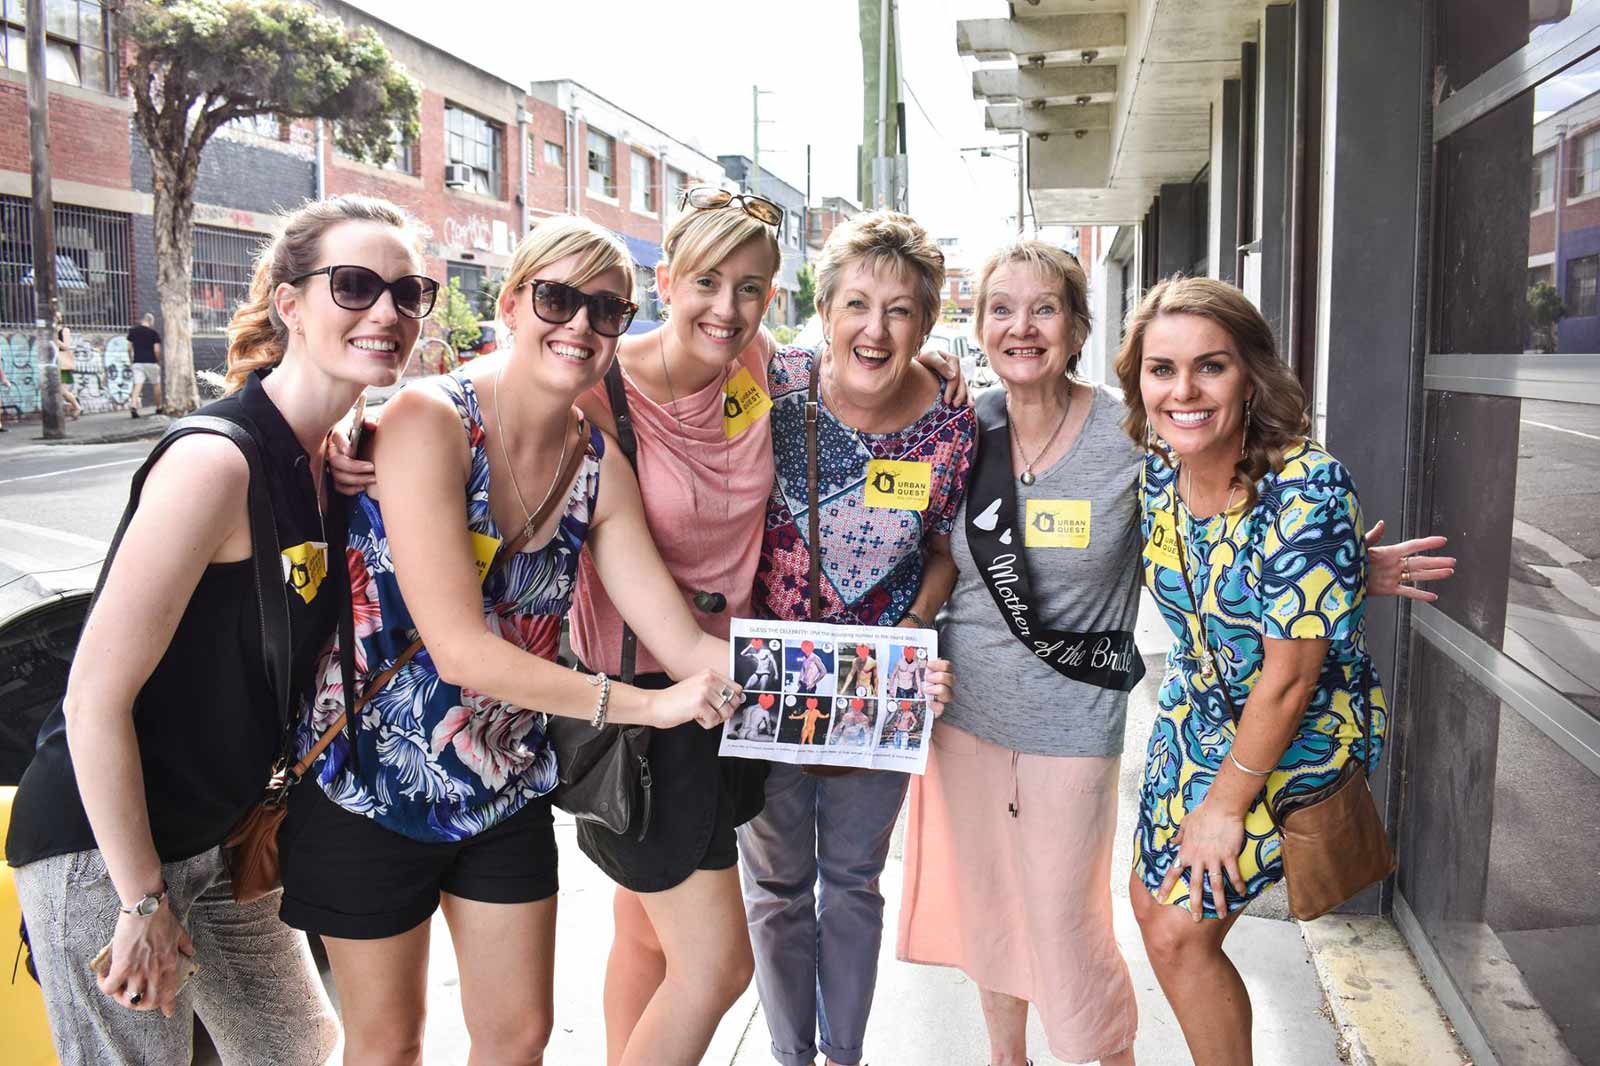 Hen Night: Amazing Race for Hen's Party